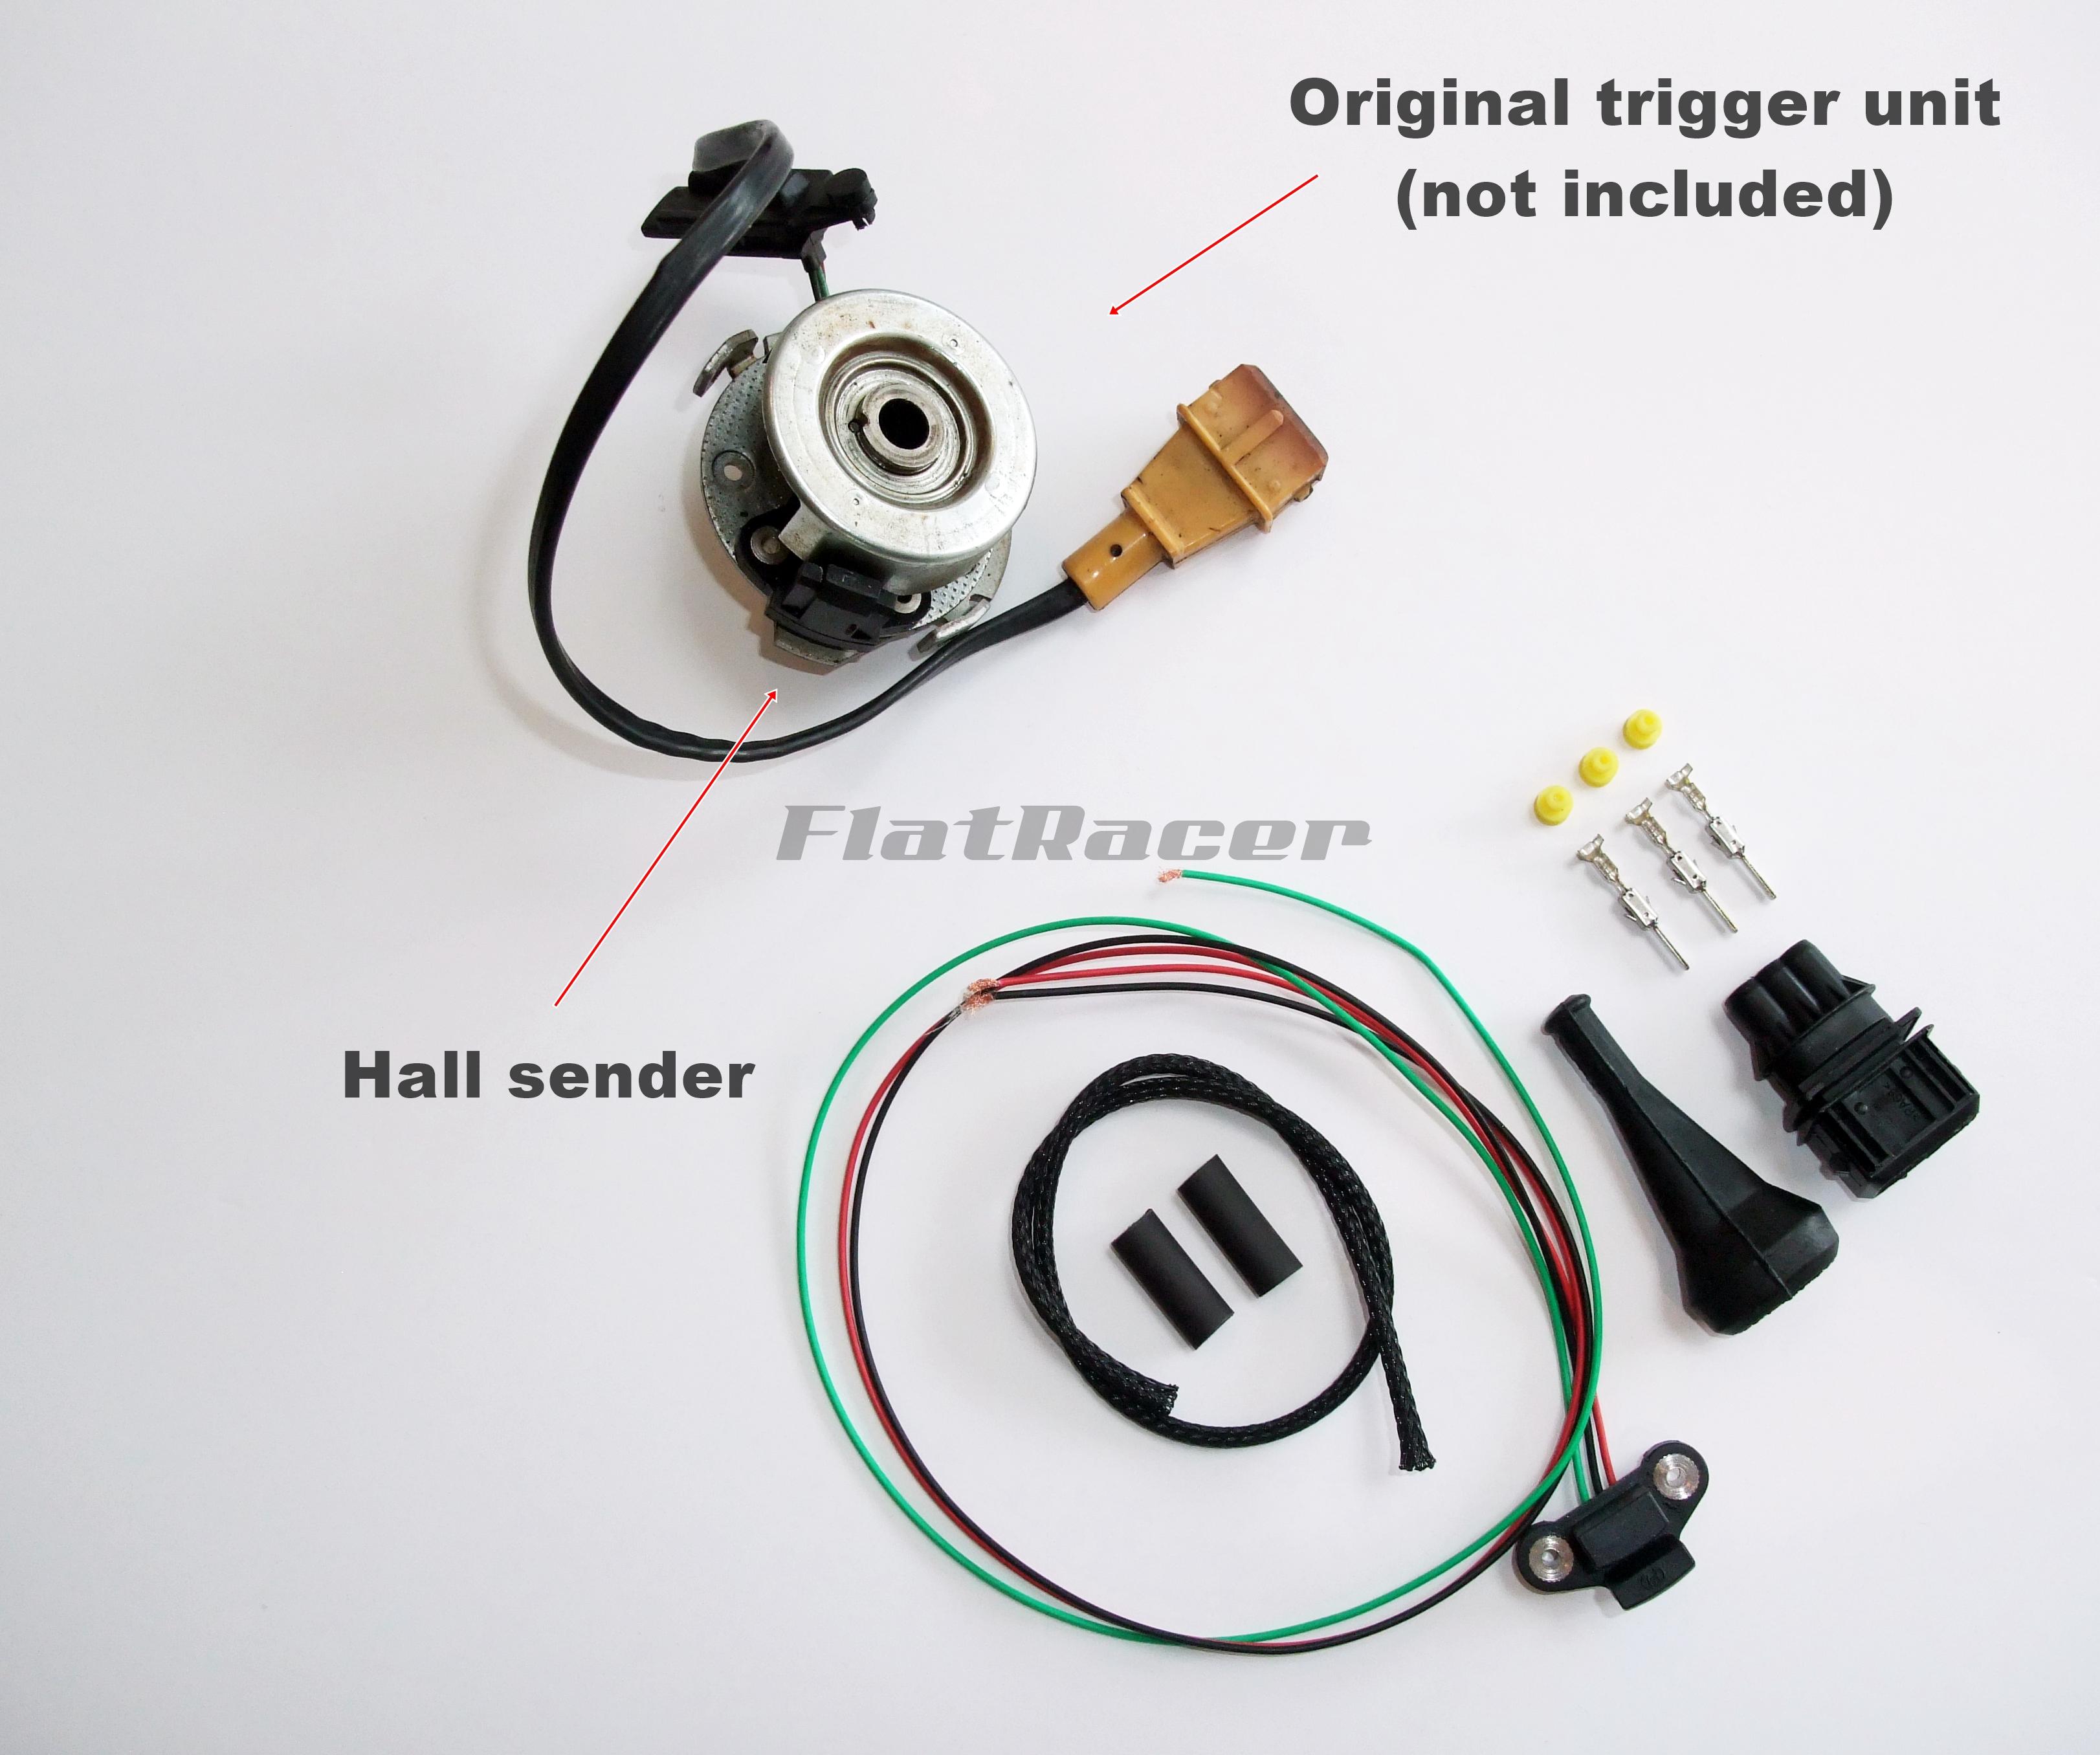 BMW Airhead Boxer post 1981 electronic ignition Hall sender REPAIR kit